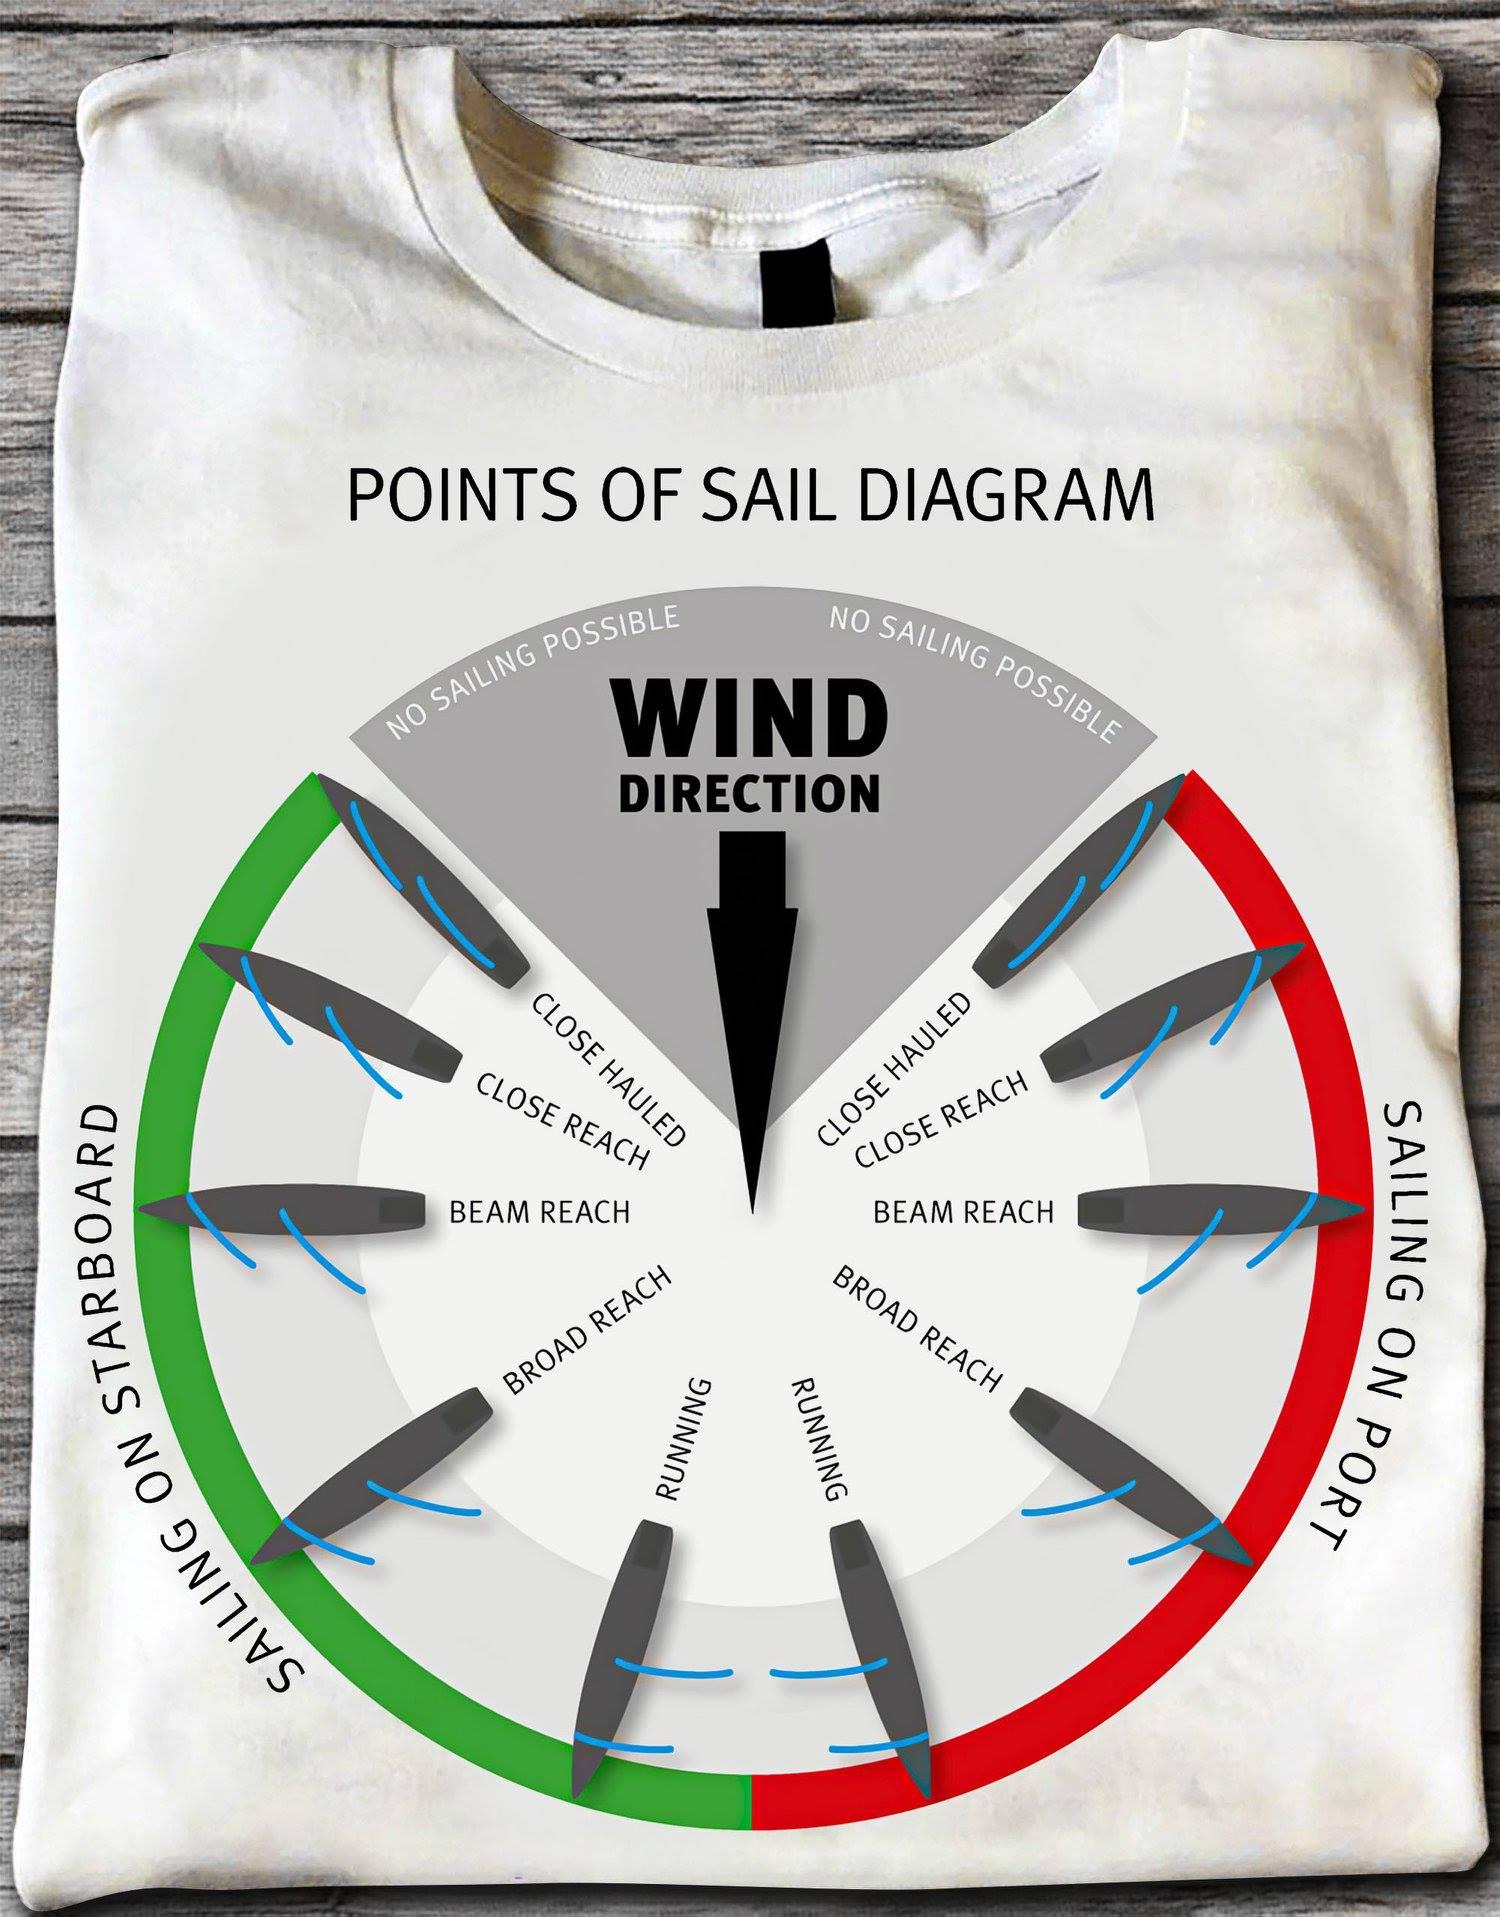 Points of sail diagram - Wind direction gear box, sailing on port, sailing on starboard